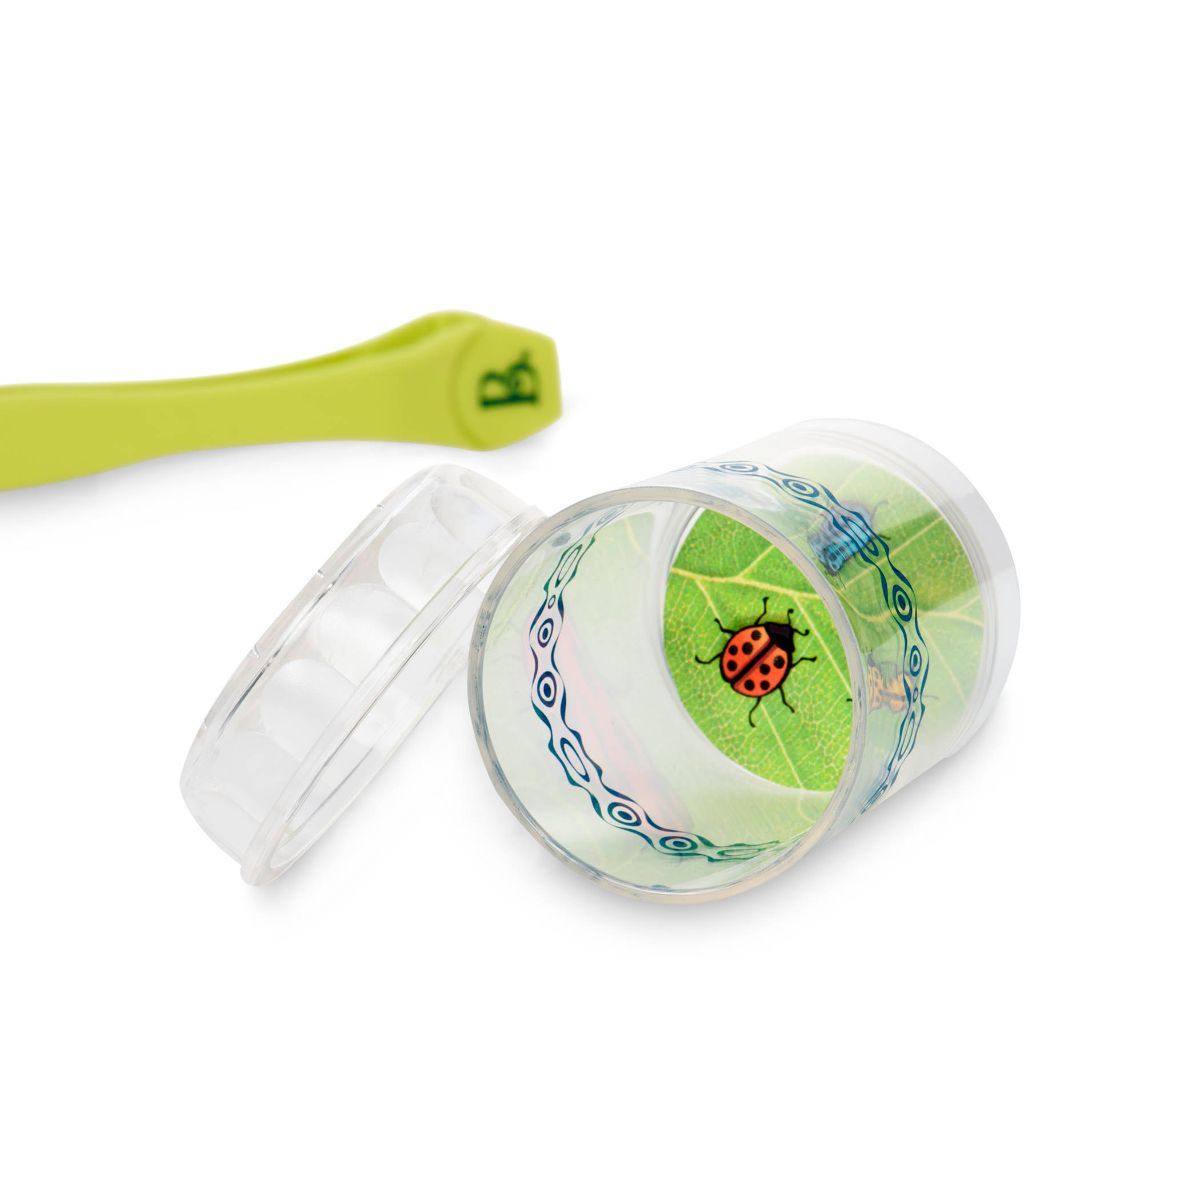 Insect Catching Kit